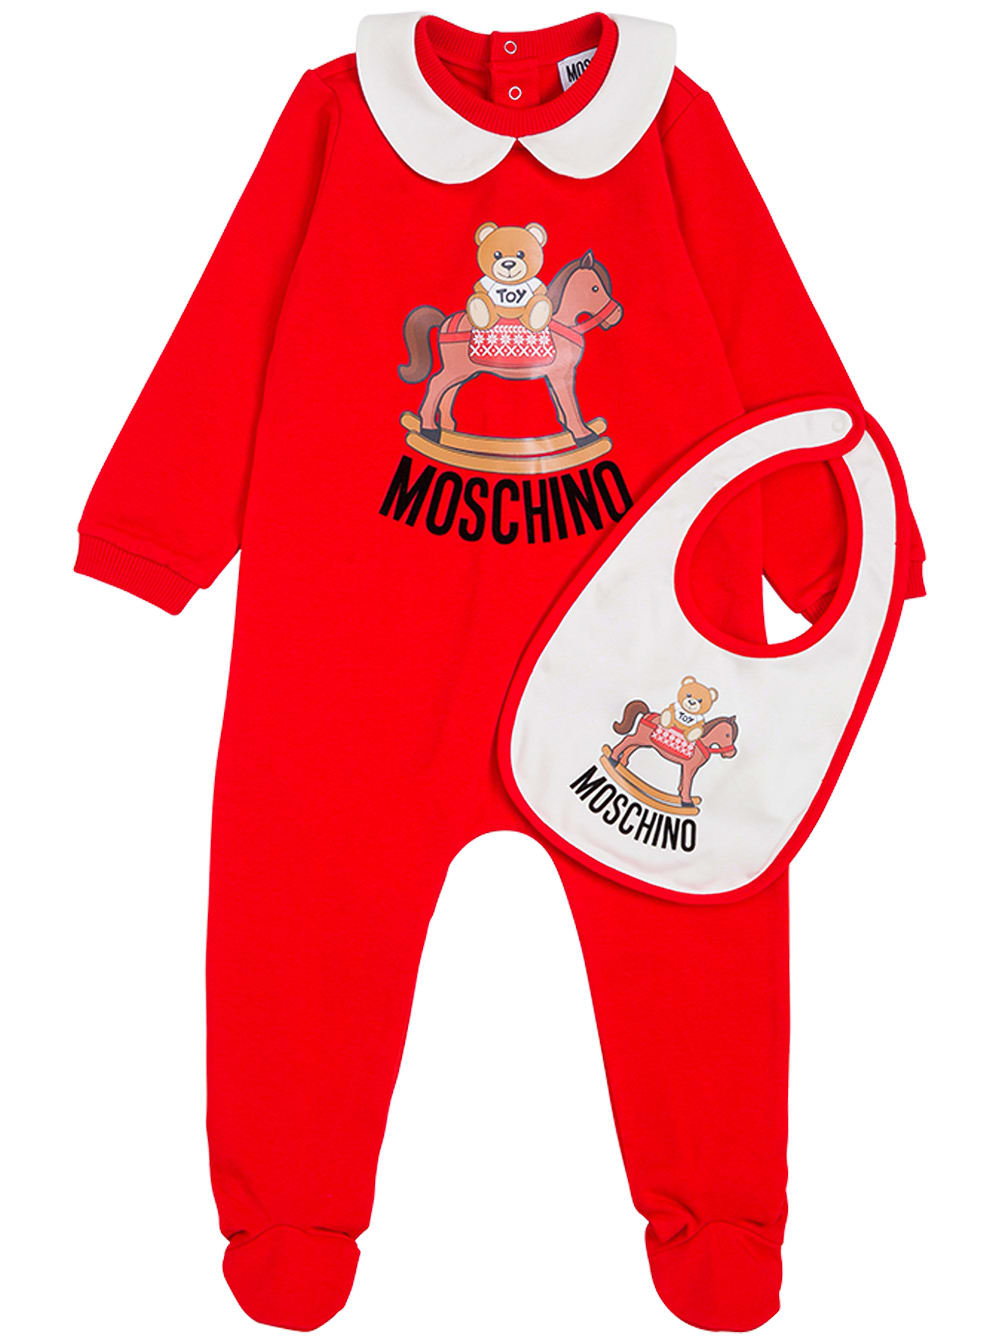 Moschino Red Cotton Romper And Bib Set With Teddy Bear Print